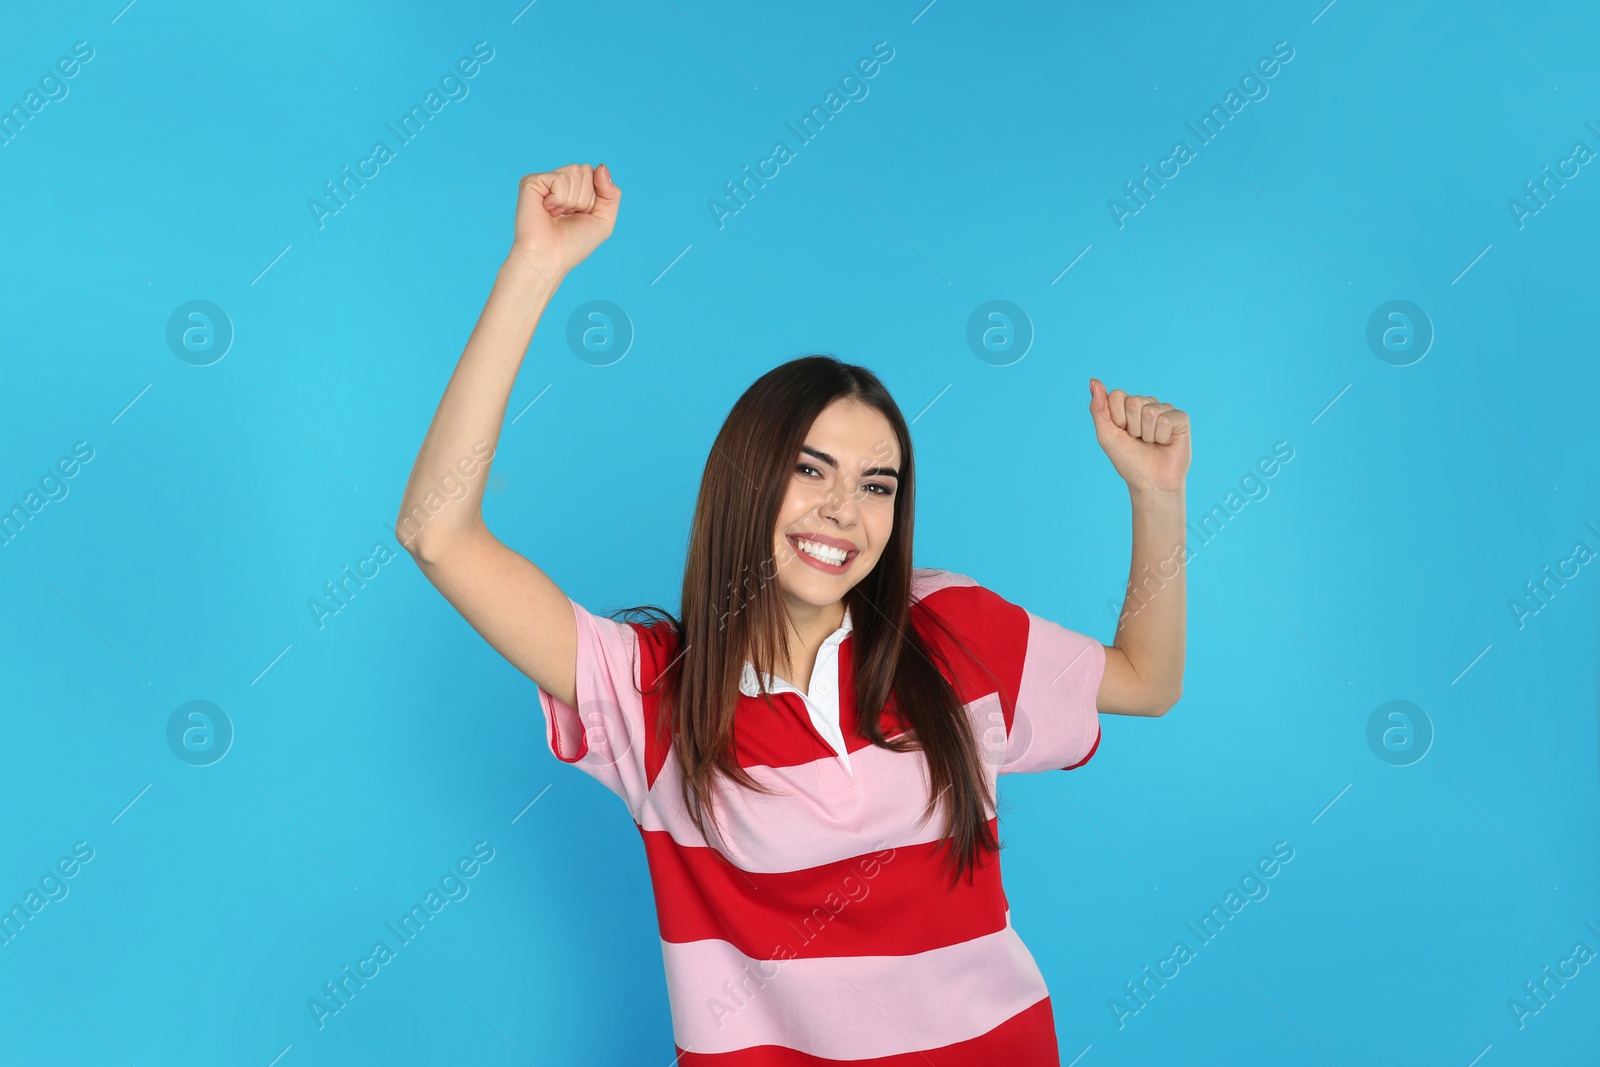 Photo of Portrait of emotional young woman on color background